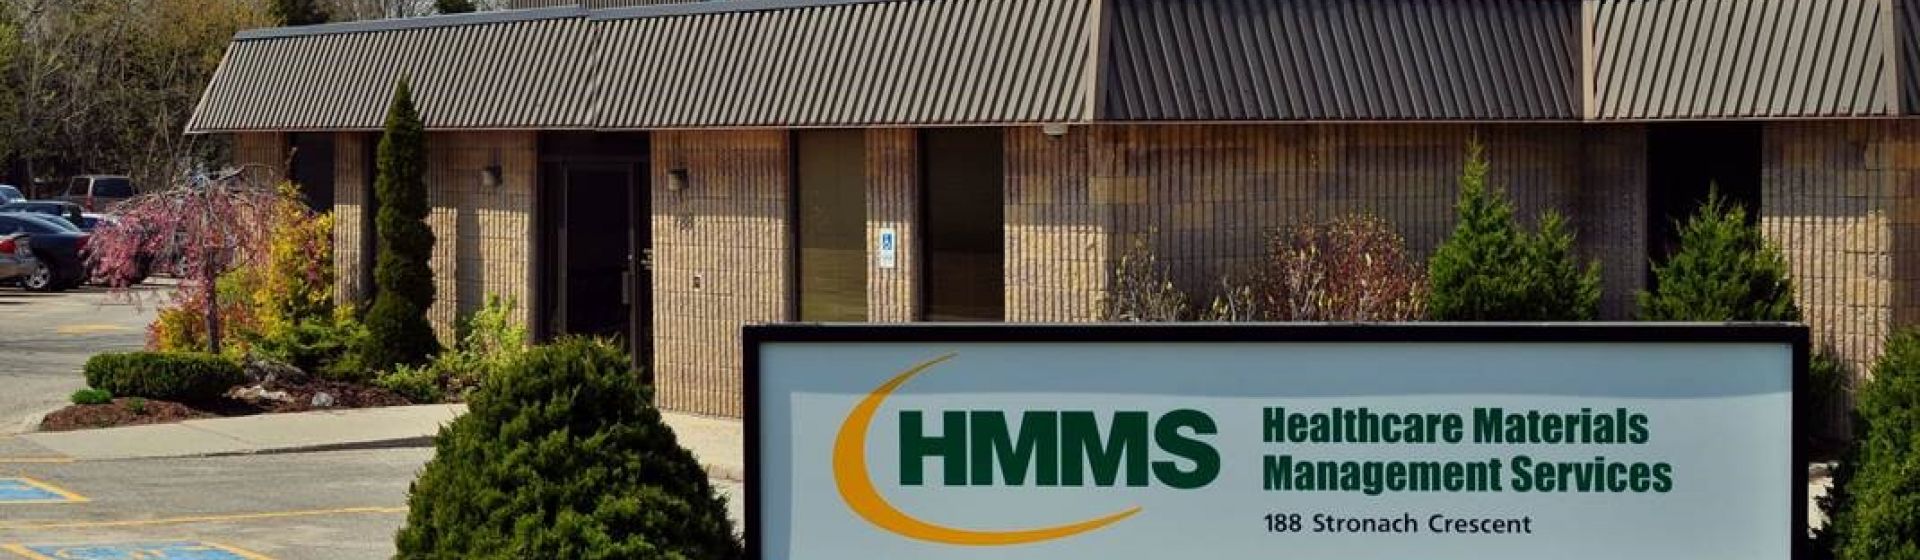 HMMS Office and Sign